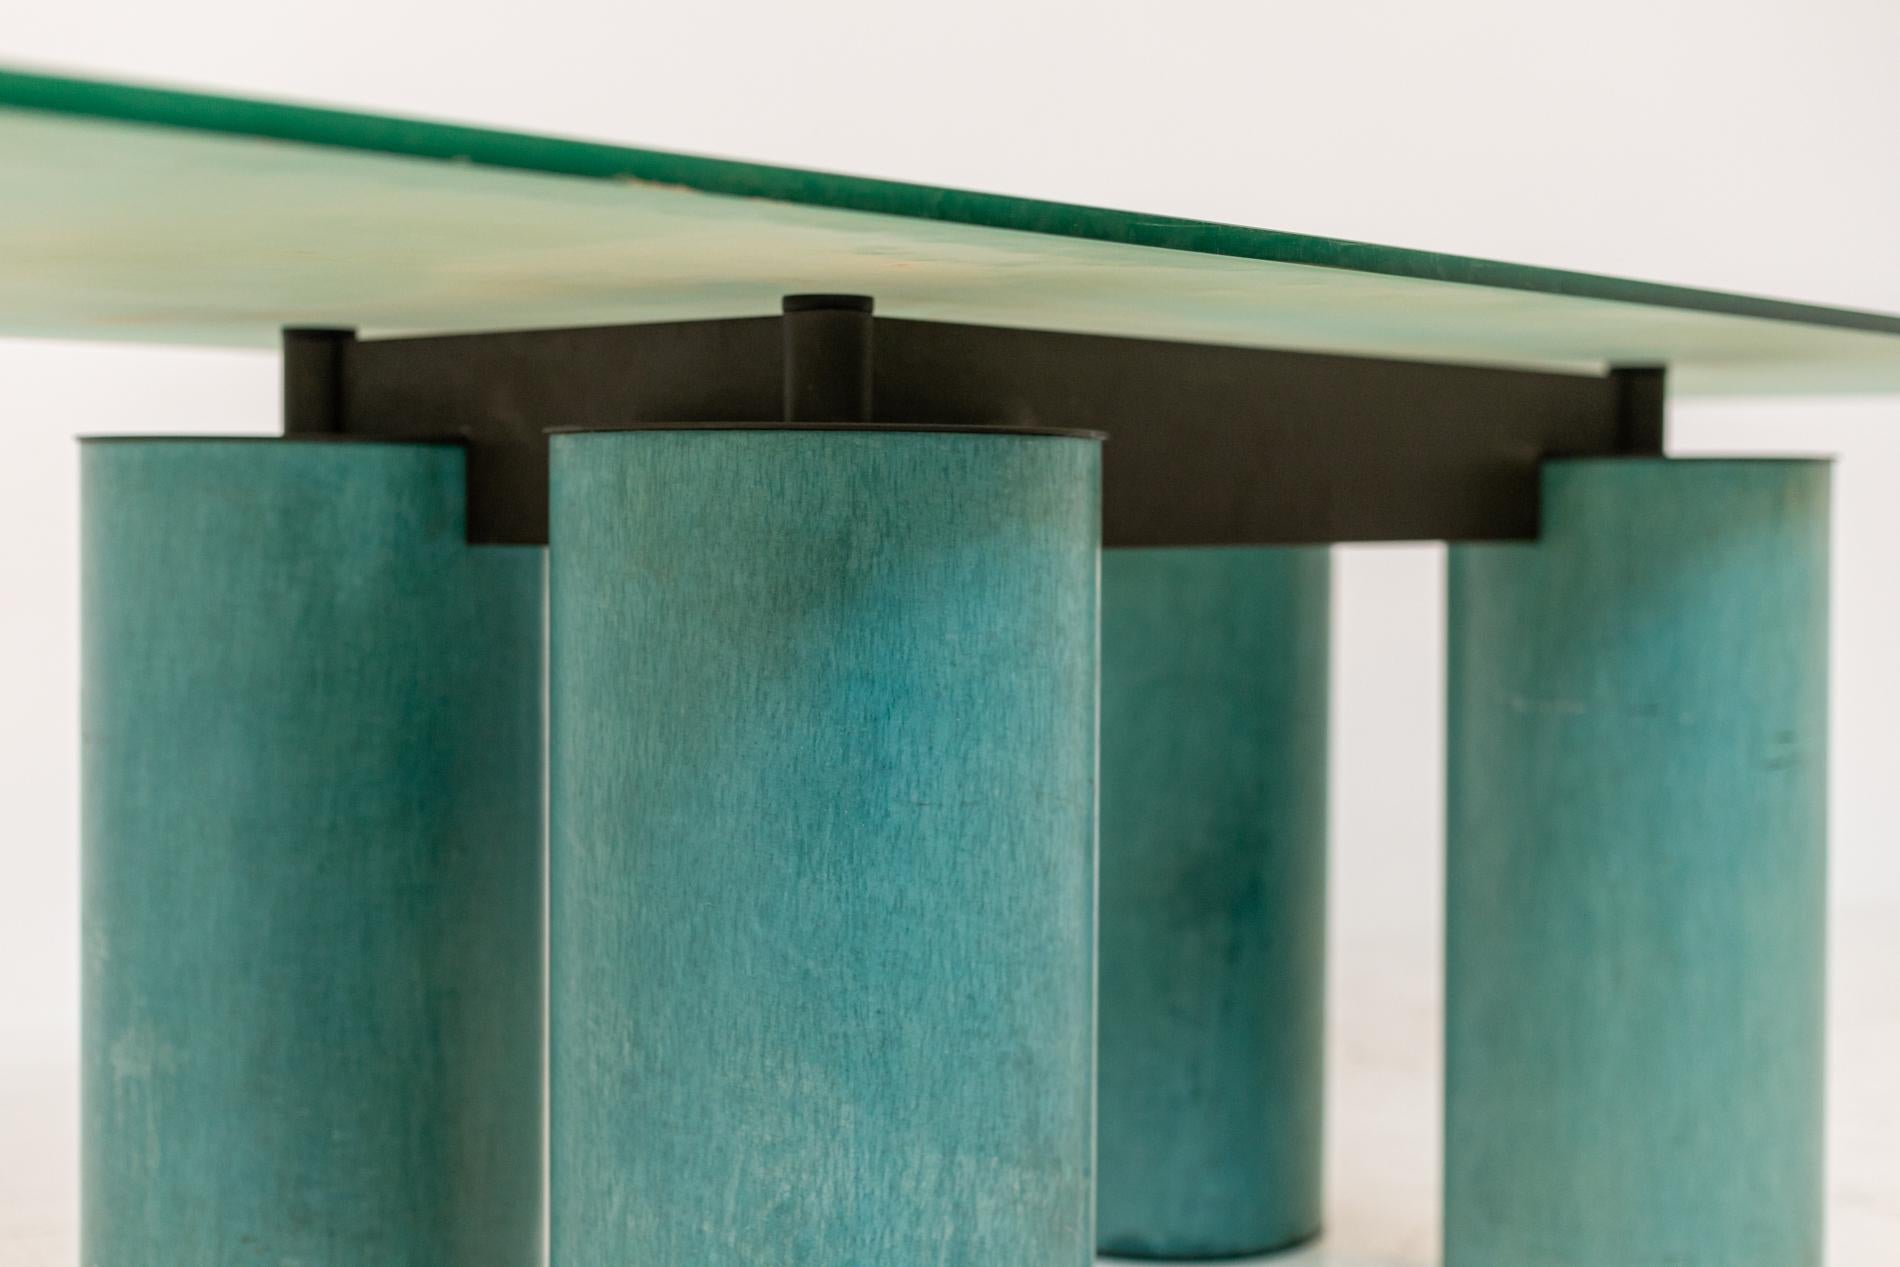 Post-Modern Italian Green Table by Lella and Massimo Vignelli Mod. Serenissimo for Acerbis